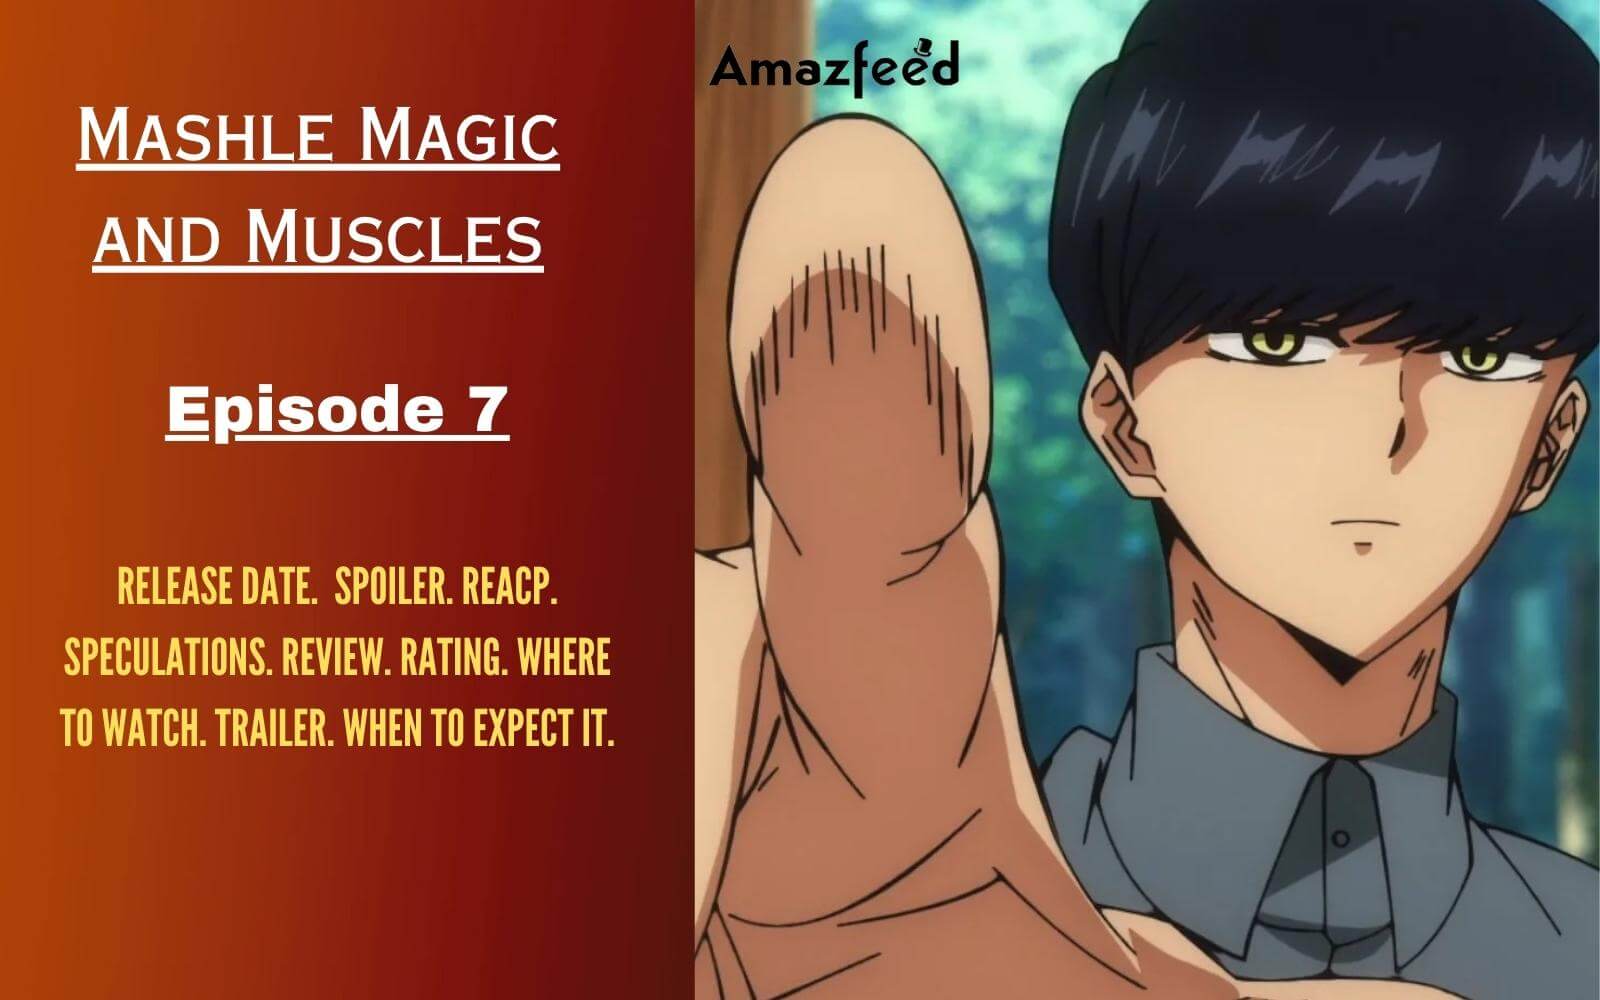 Mashle: Magic and Muscles Episode 10 Release Date & Time - IMDb